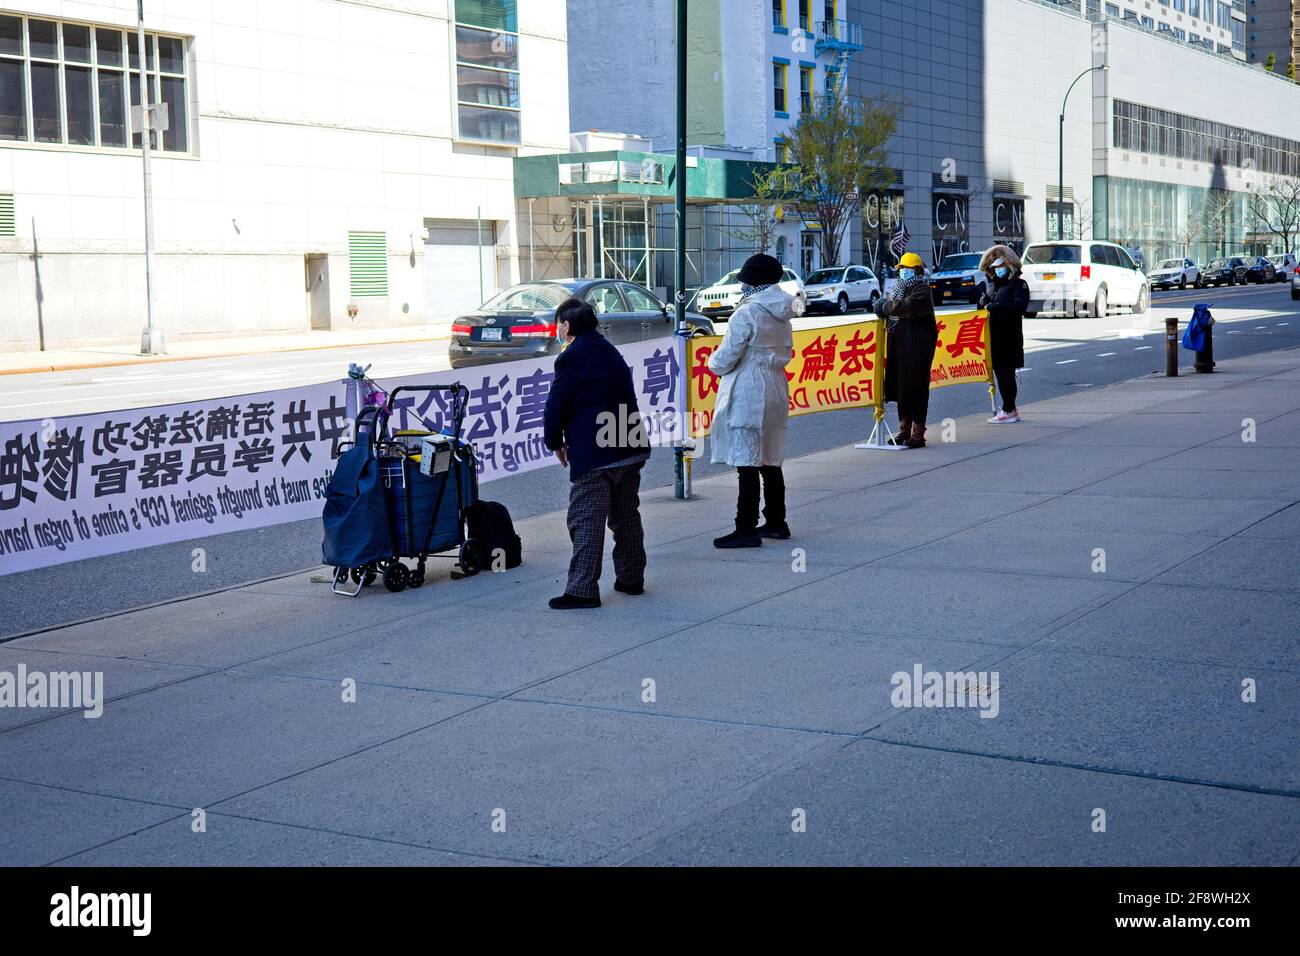 New York, NY, USA - April 14, 2021: Falun Gong Chinese spiritual movement with signs facing W 42nd Street in Manhattan Stock Photo